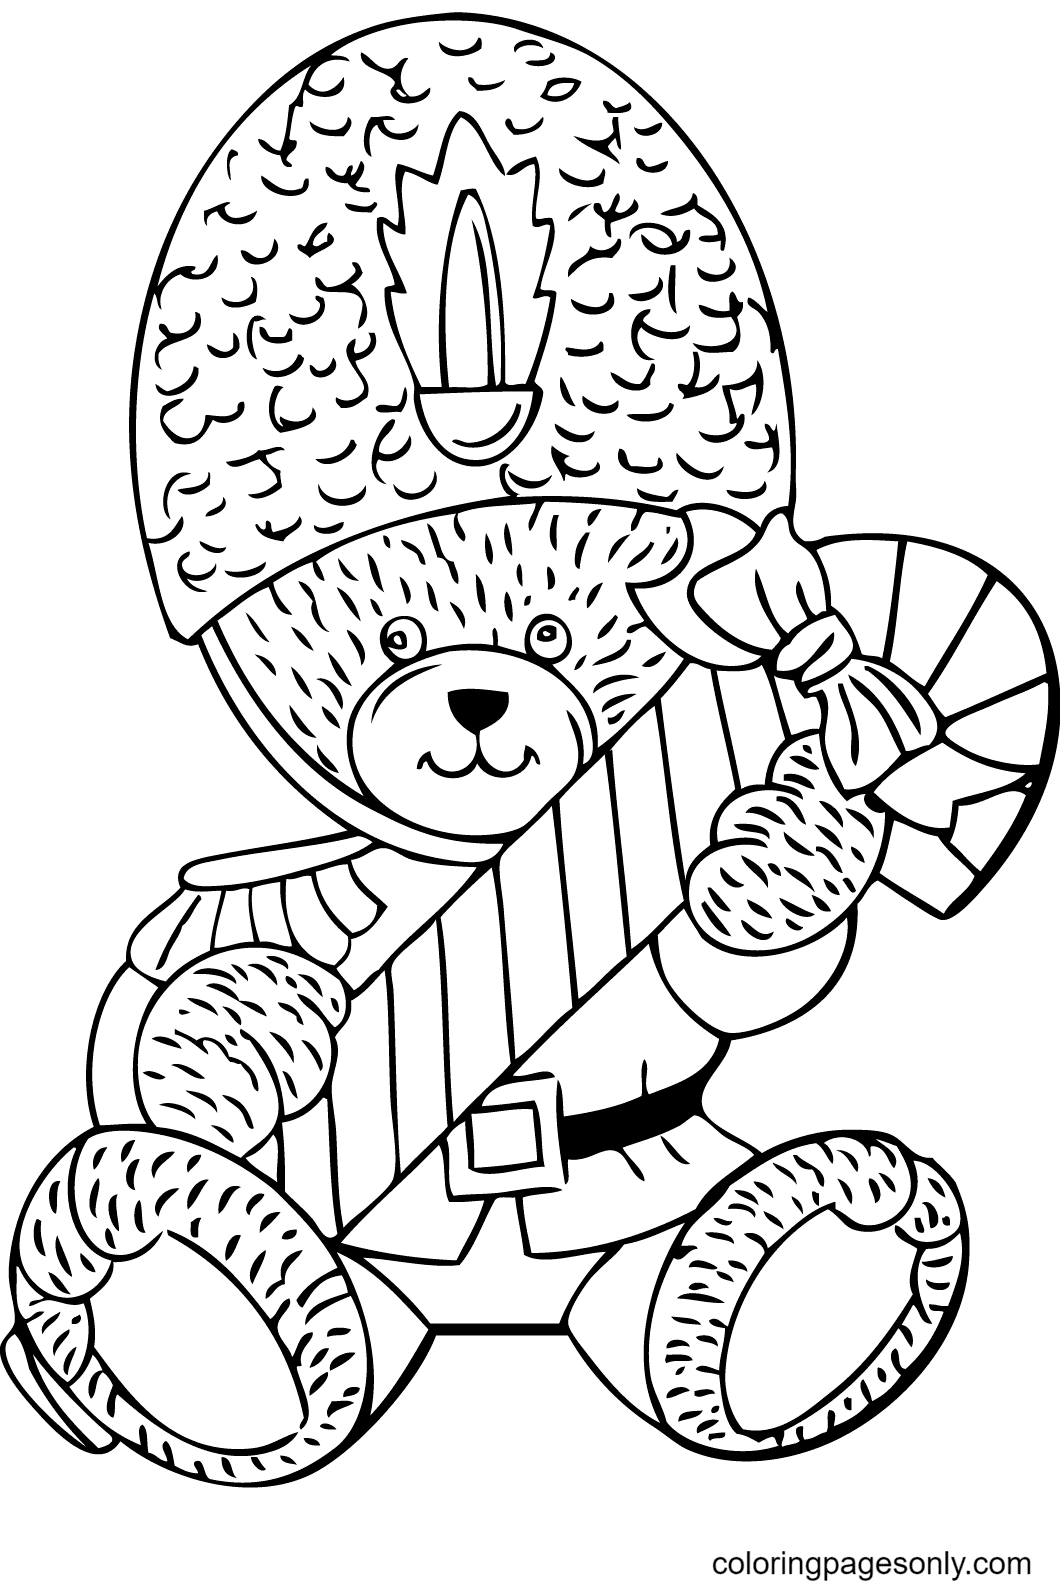 Teddy Bear with Candy Cane Coloring Page